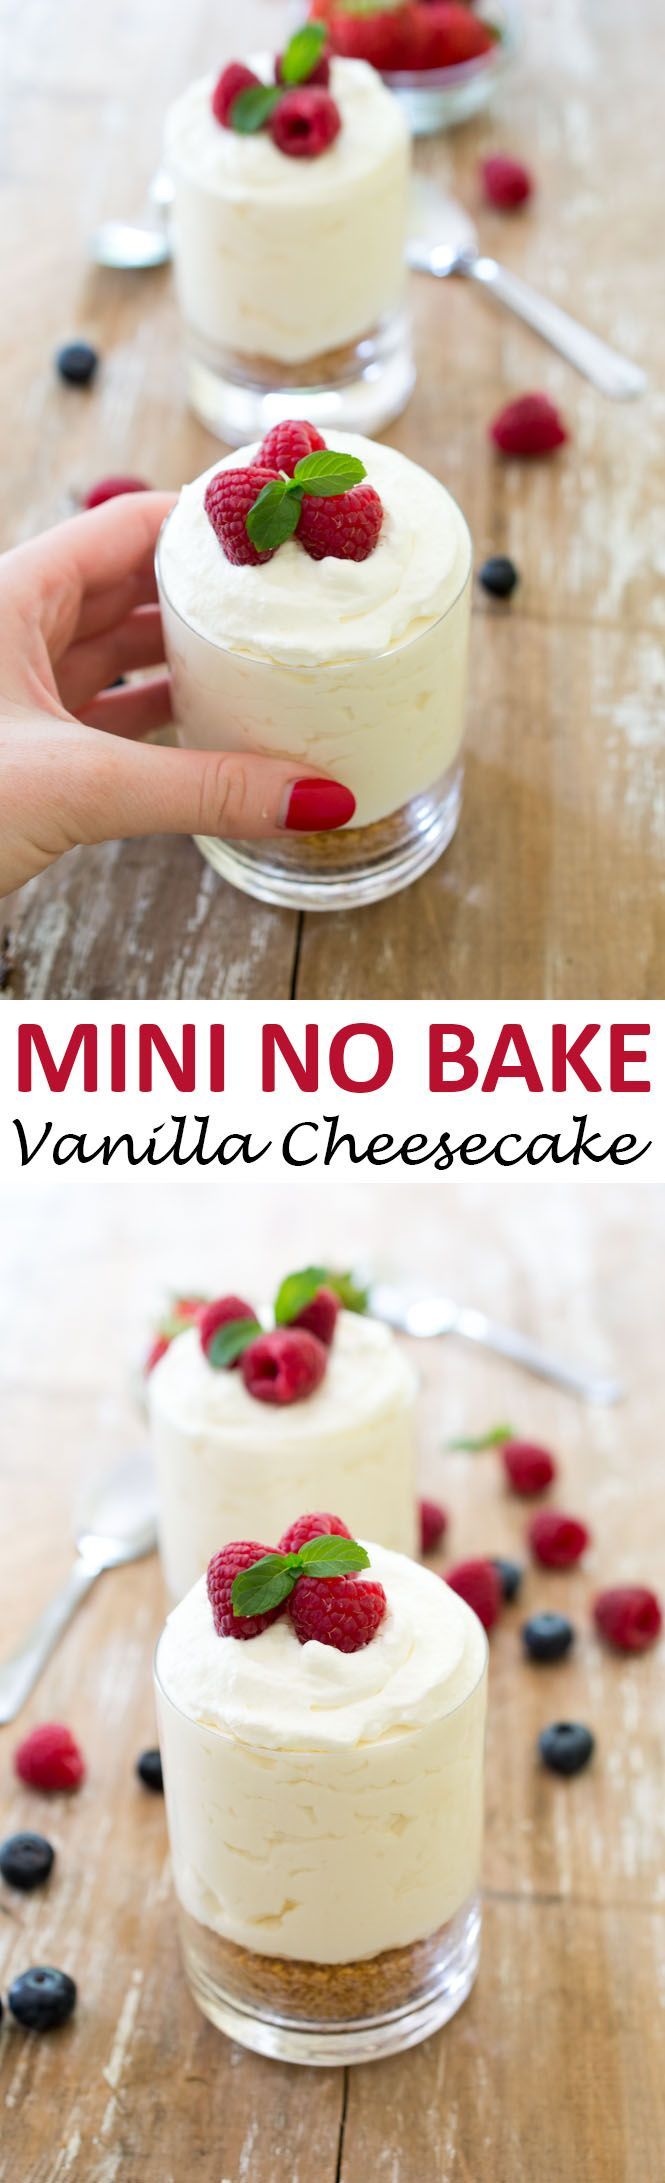 Individual No Bake Vanilla Cheesecake. A super easy no bake dessert that takes less than 15 minutes prep time and only 7